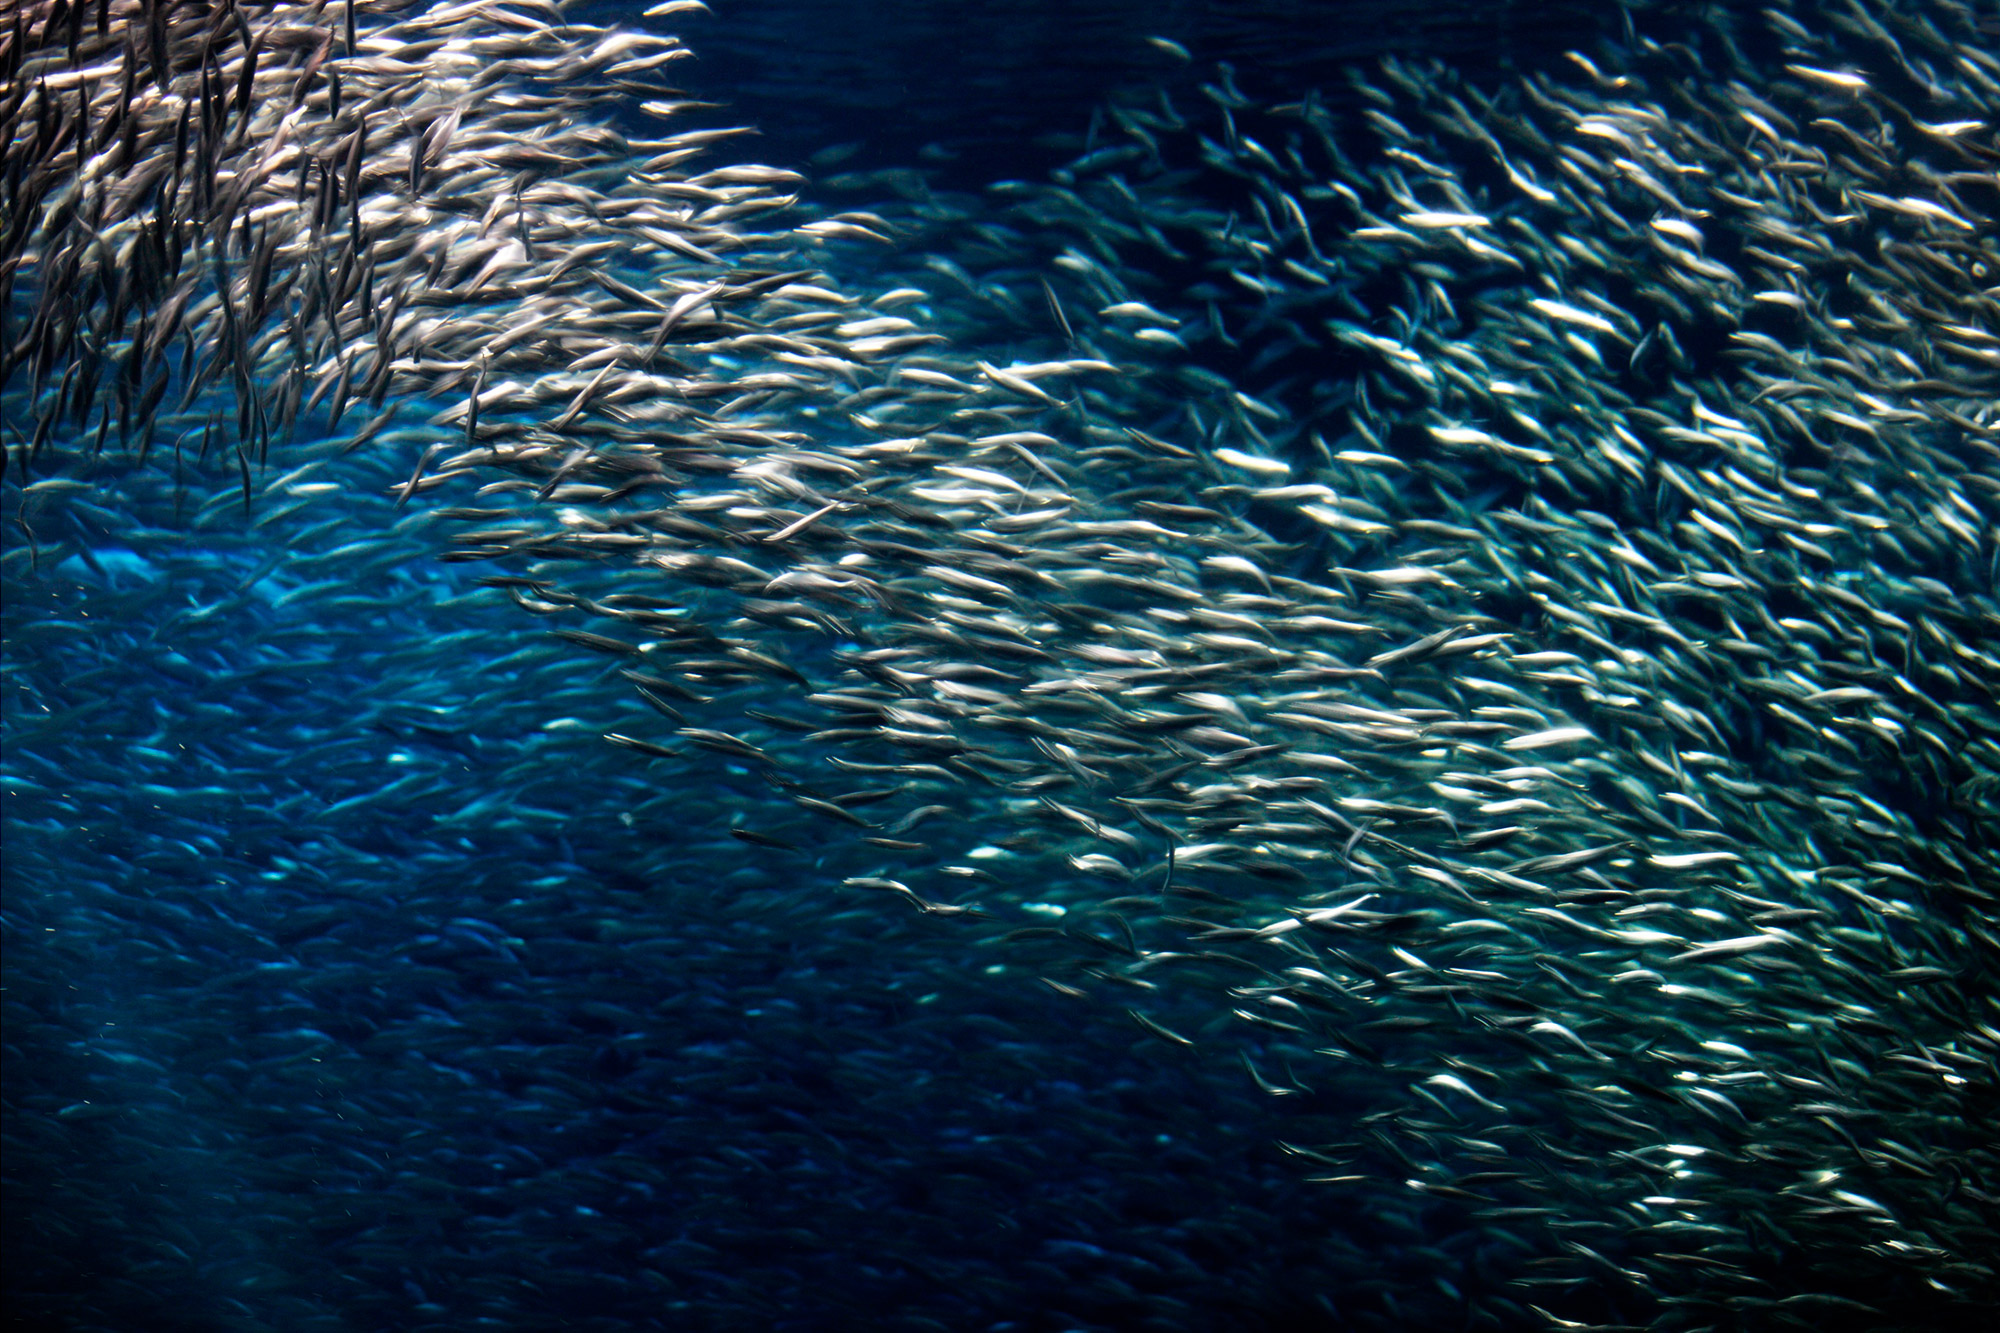 Unraveling the Secret Behind California’s Mysterious Anchovy Population Fluctuations